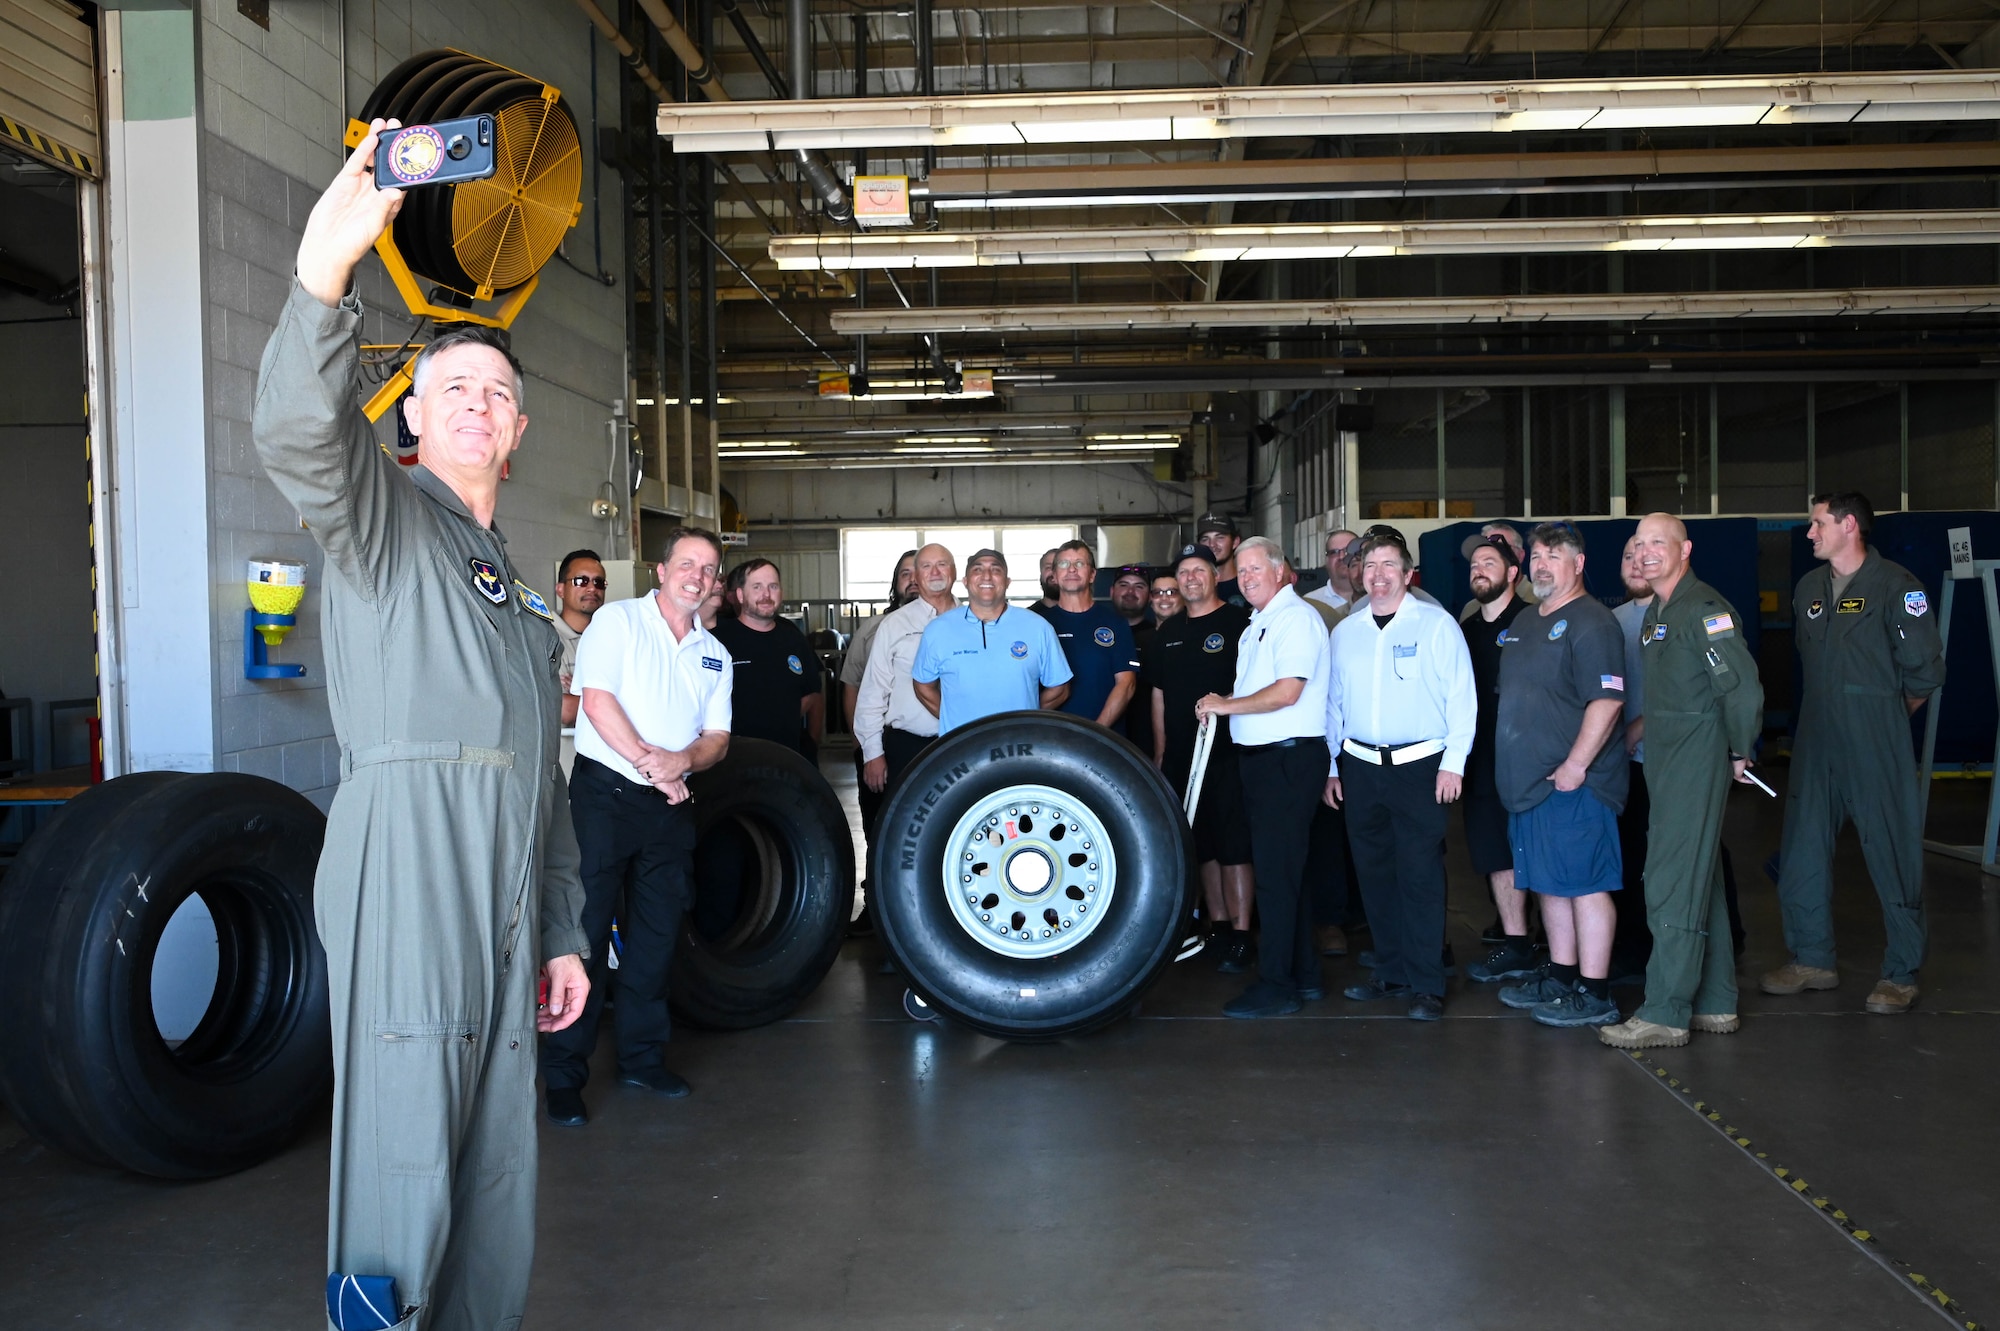 U.S. Air Force Maj. Gen. Craig D. Wills, 19th Air Force commander, takes a photo with 97th Maintenance Group members at Altus Air Force Base, Oklahoma, June 23, 2022. Wills visited the tire shop to learn about a new way of making KC-46 Pegasus tires. (U.S. Air Force photo by Senior Airman Kayla Christenson)